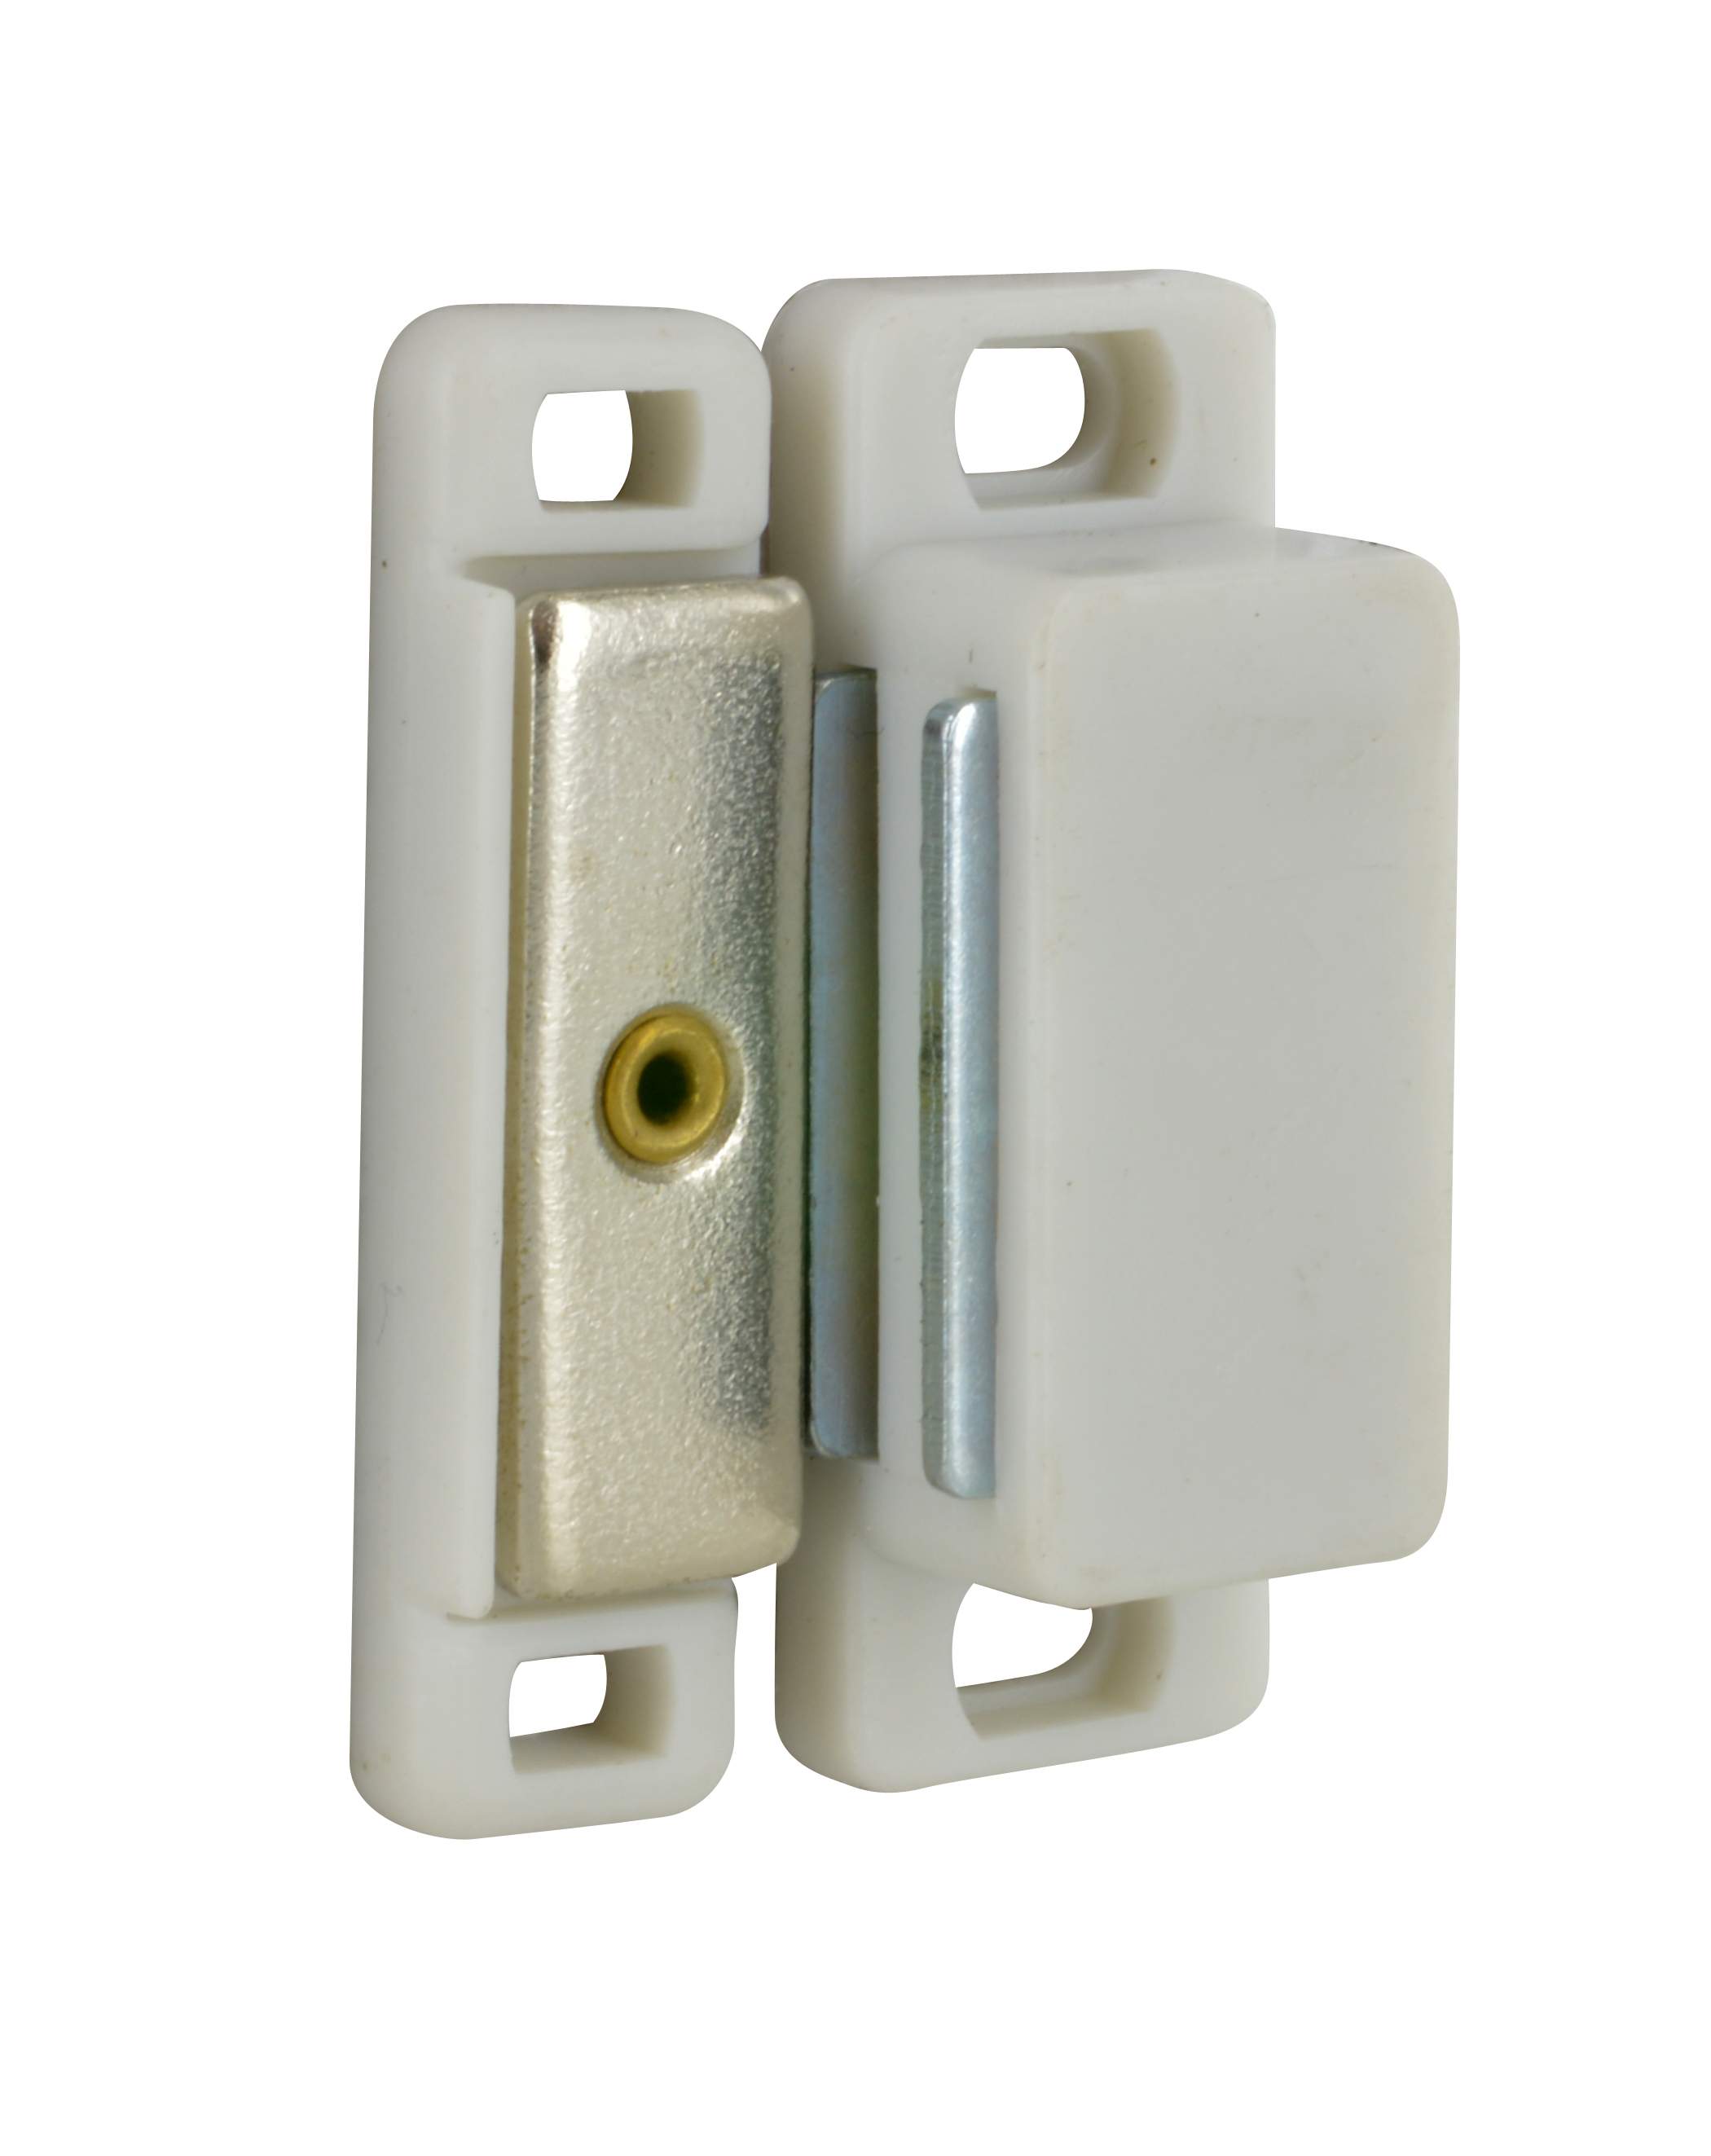 Magnetic latch white 8kg, 46x16x15 mm, 2 pieces